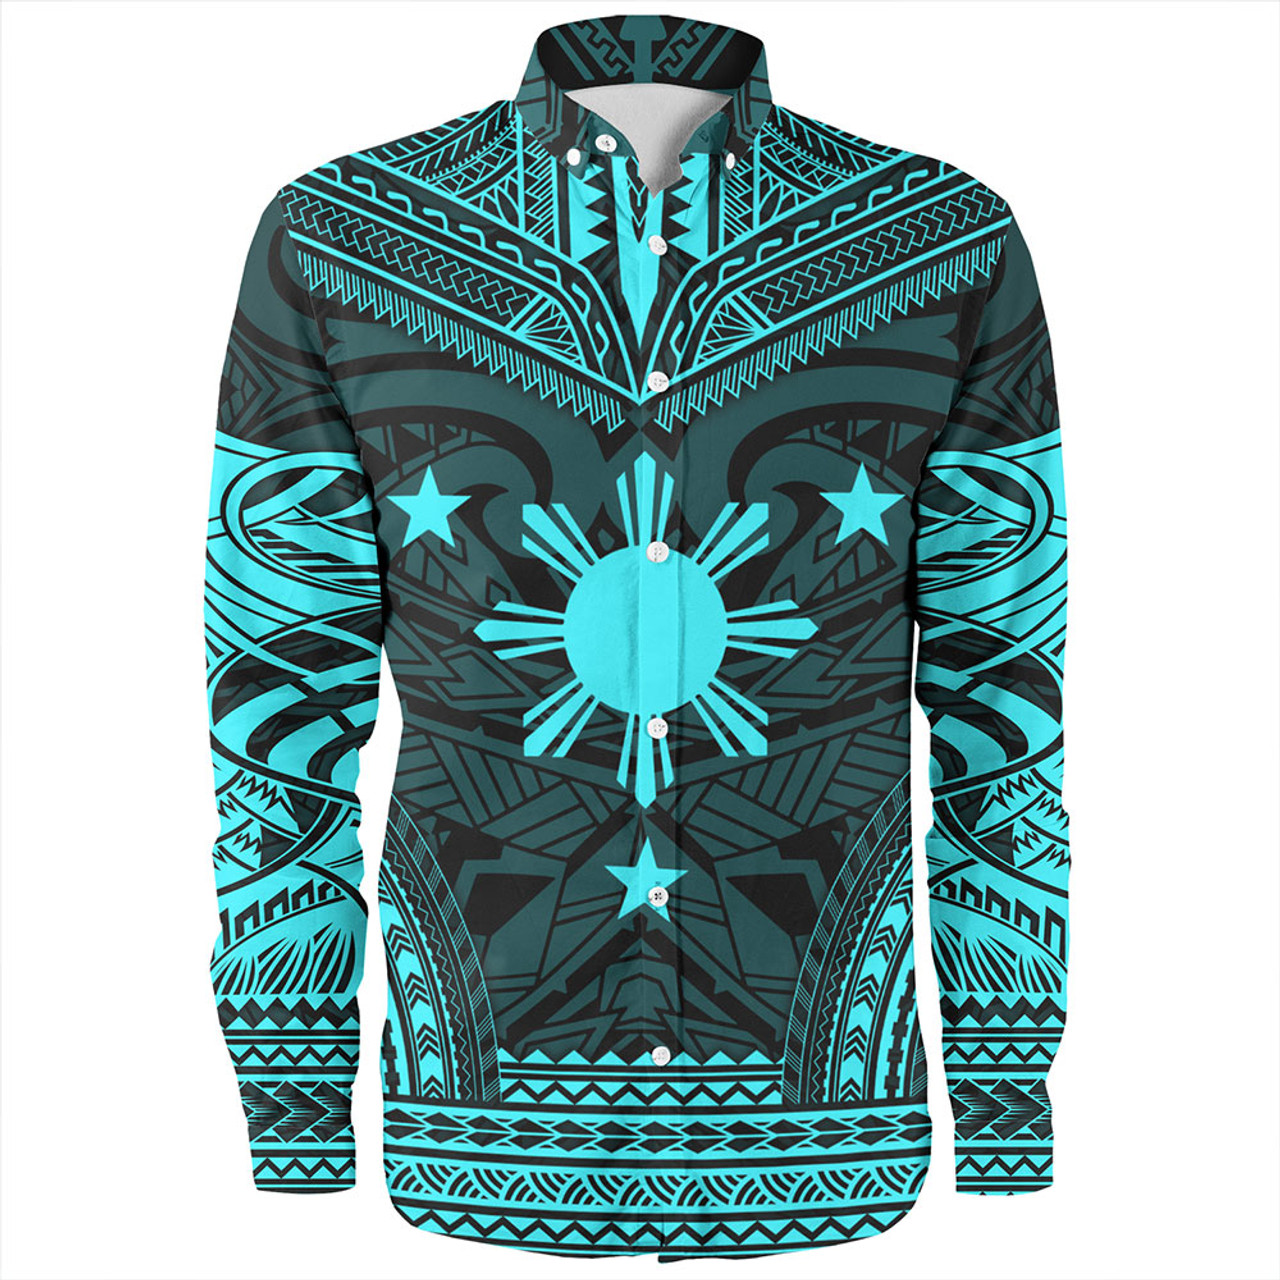 Philippines Long Sleeve Shirt - Philippines Cheif Tattoo Patterns Style